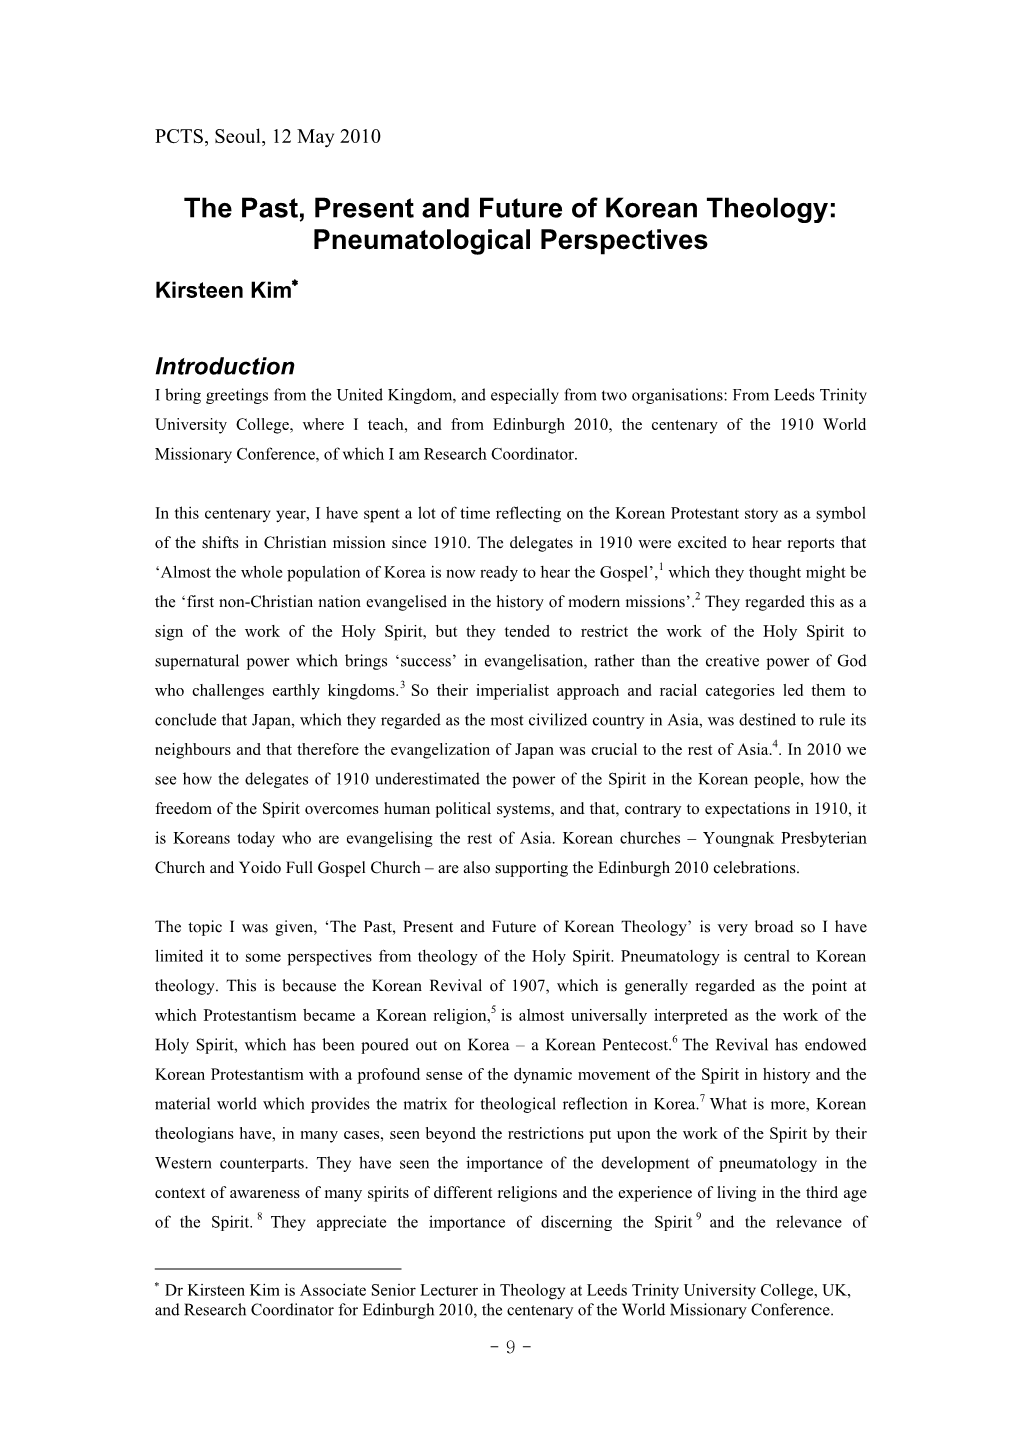 The Past, Present and Future of Korean Theology: Pneumatological Perspectives